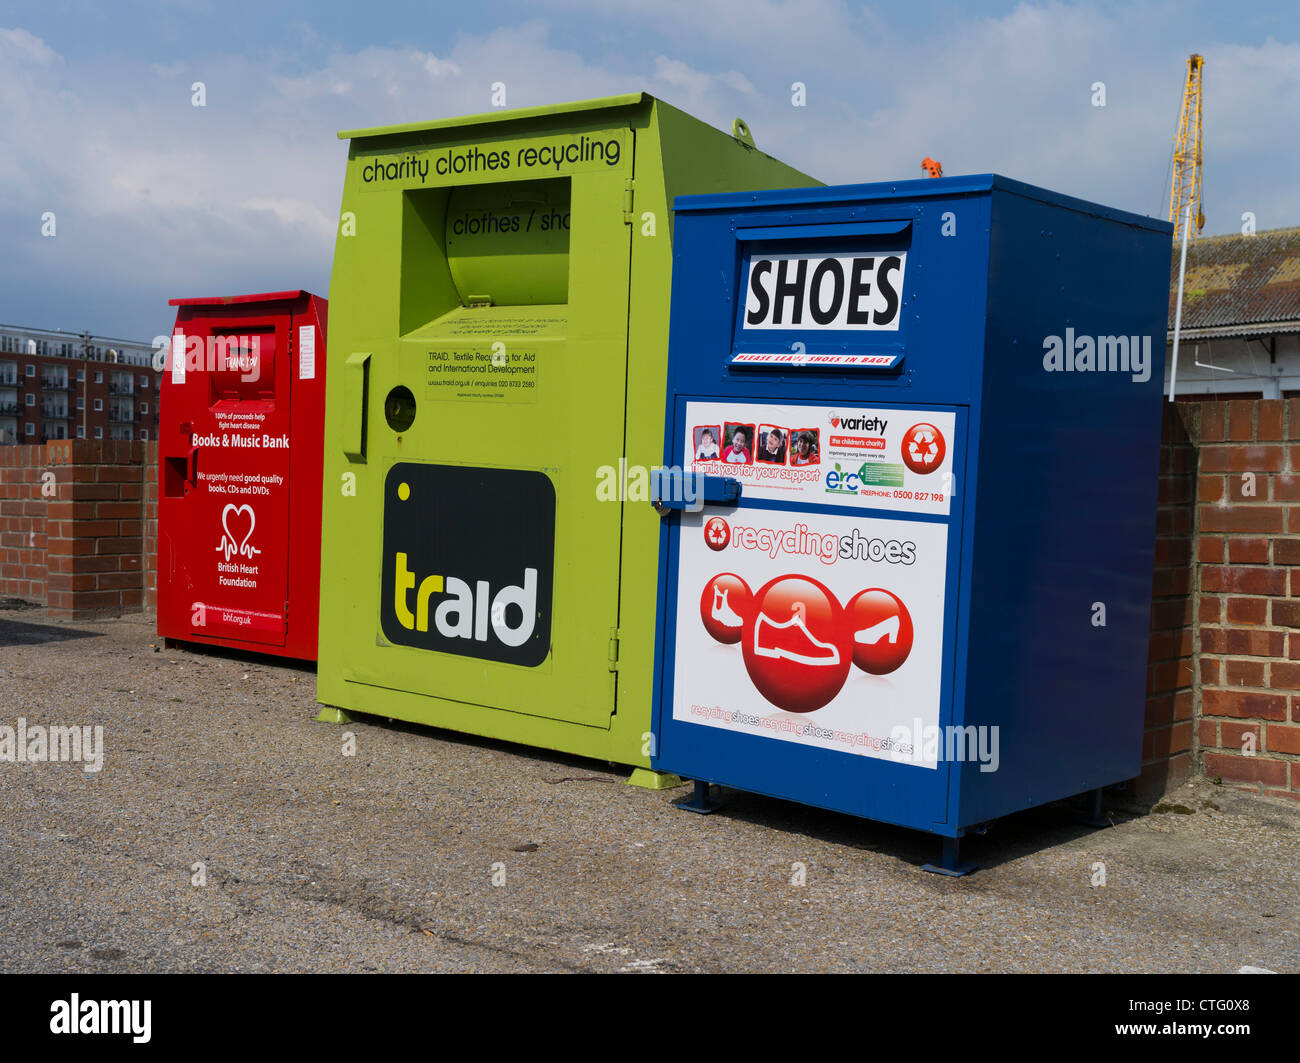 dh Recycling Behälter UMWELT HAMPSHIRE bin Schuhe Charity Kleidung Sammlung Old Portsmouth Recycling Bank uk Stockfoto